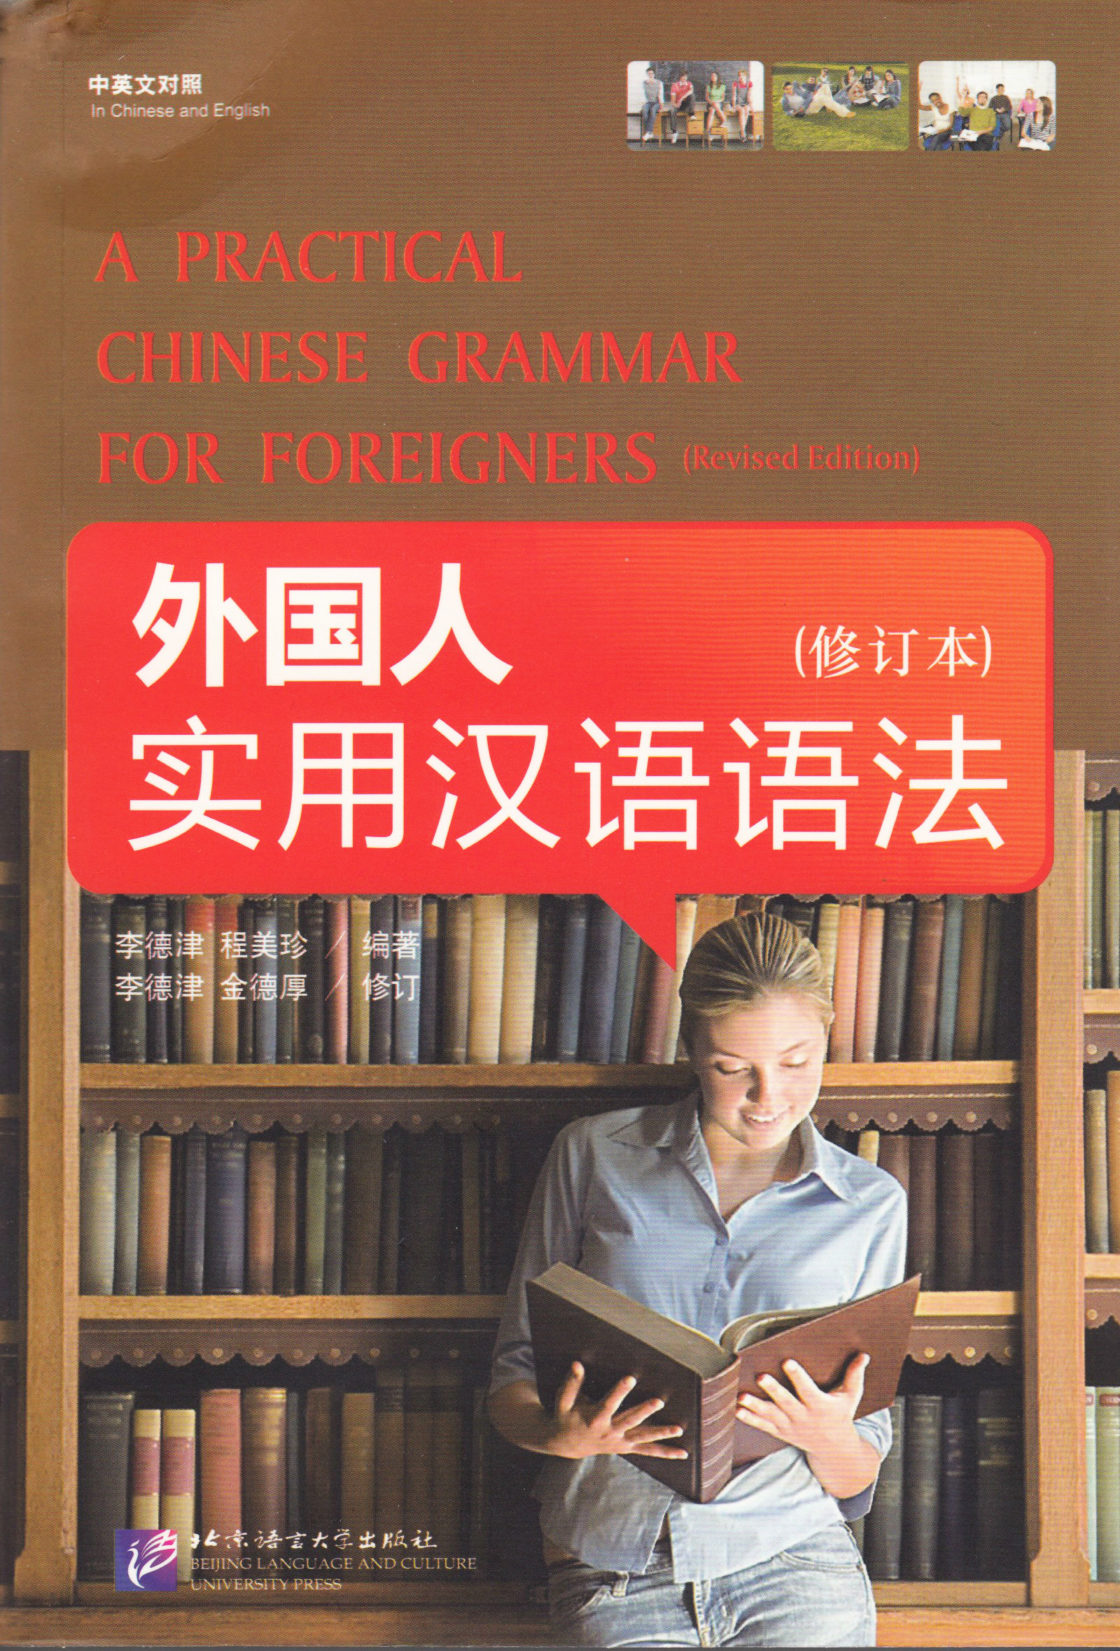 A Practical Chinese Grammar for Foreigners (Revised edition)